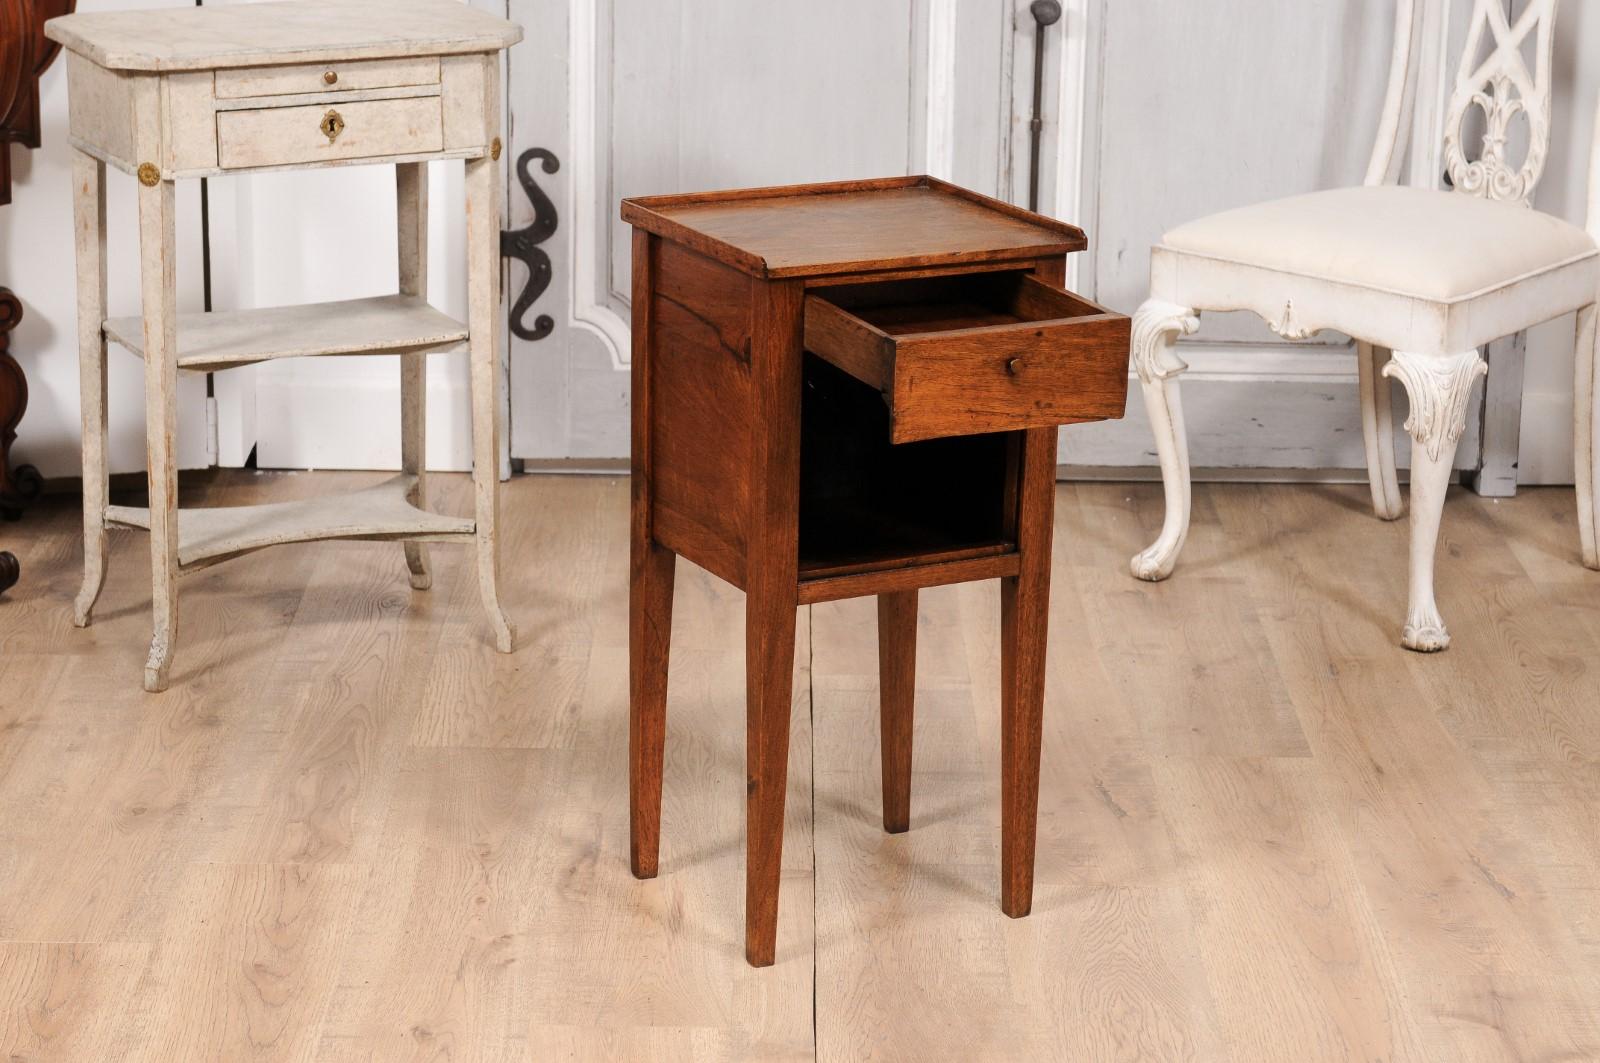 18th Century Italian Walnut Bedside Table with Single Drawer and Tambour Door For Sale 2